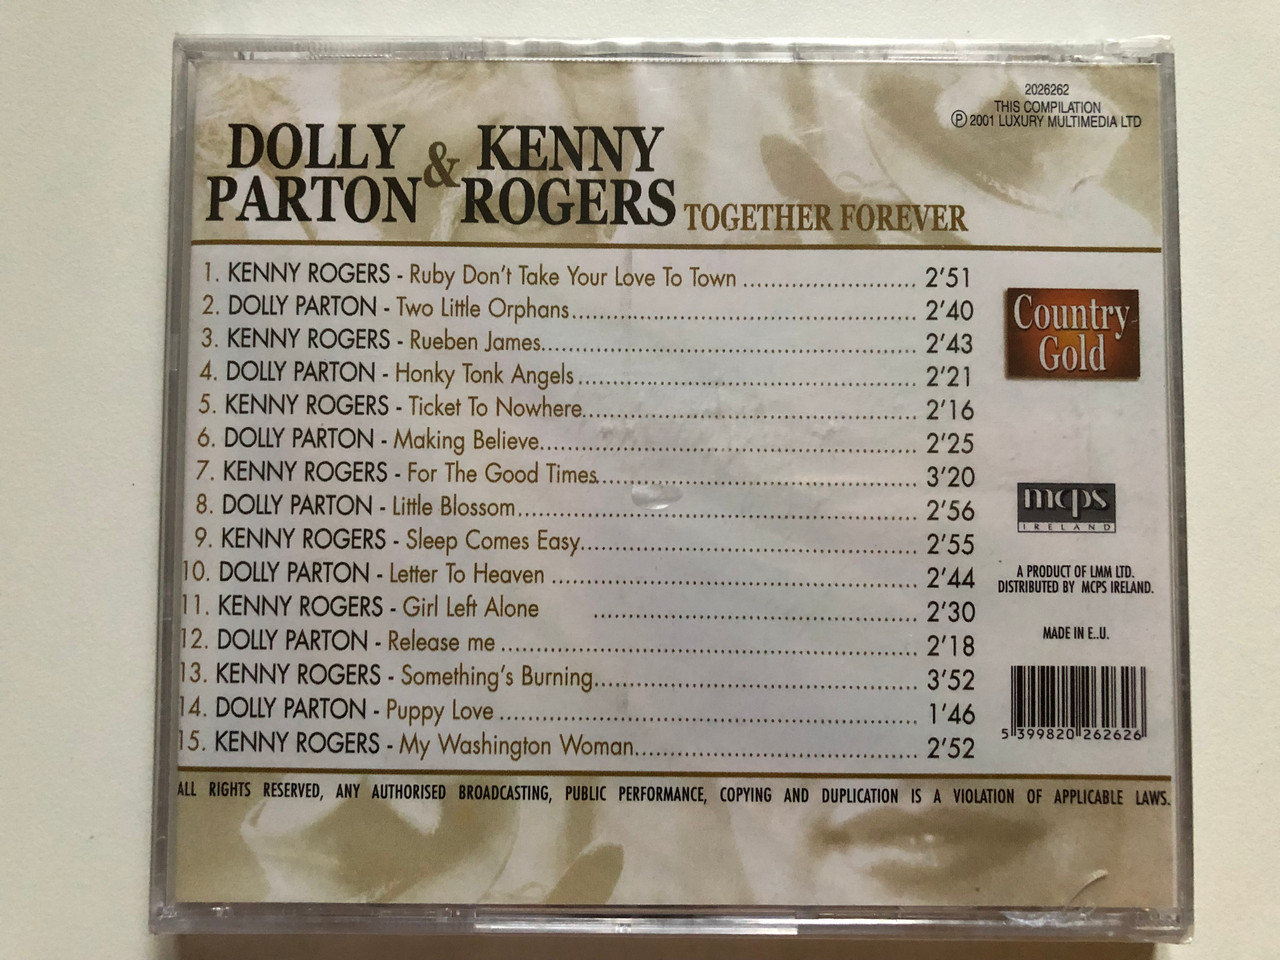 https://cdn10.bigcommerce.com/s-62bdpkt7pb/products/0/images/264661/Dolly_Parton_Kenny_Rogers_-_Together_Forever_Ruby_Dont_Take_Your_Love_To_Town_Sleep_Comes_Easy_Honky_Tonk_Angels_Making_Believe_Letter_To_Heaven_and_many_more..._Conutry_Gold_Lux__81662.1674536039.1280.1280.JPG?c=2&_gl=1*1e5h7zd*_ga*MjA2NTIxMjE2MC4xNTkwNTEyNTMy*_ga_WS2VZYPC6G*MTY3NDUzNDI1MC43MjYuMS4xNjc0NTM1MjkxLjUyLjAuMA..